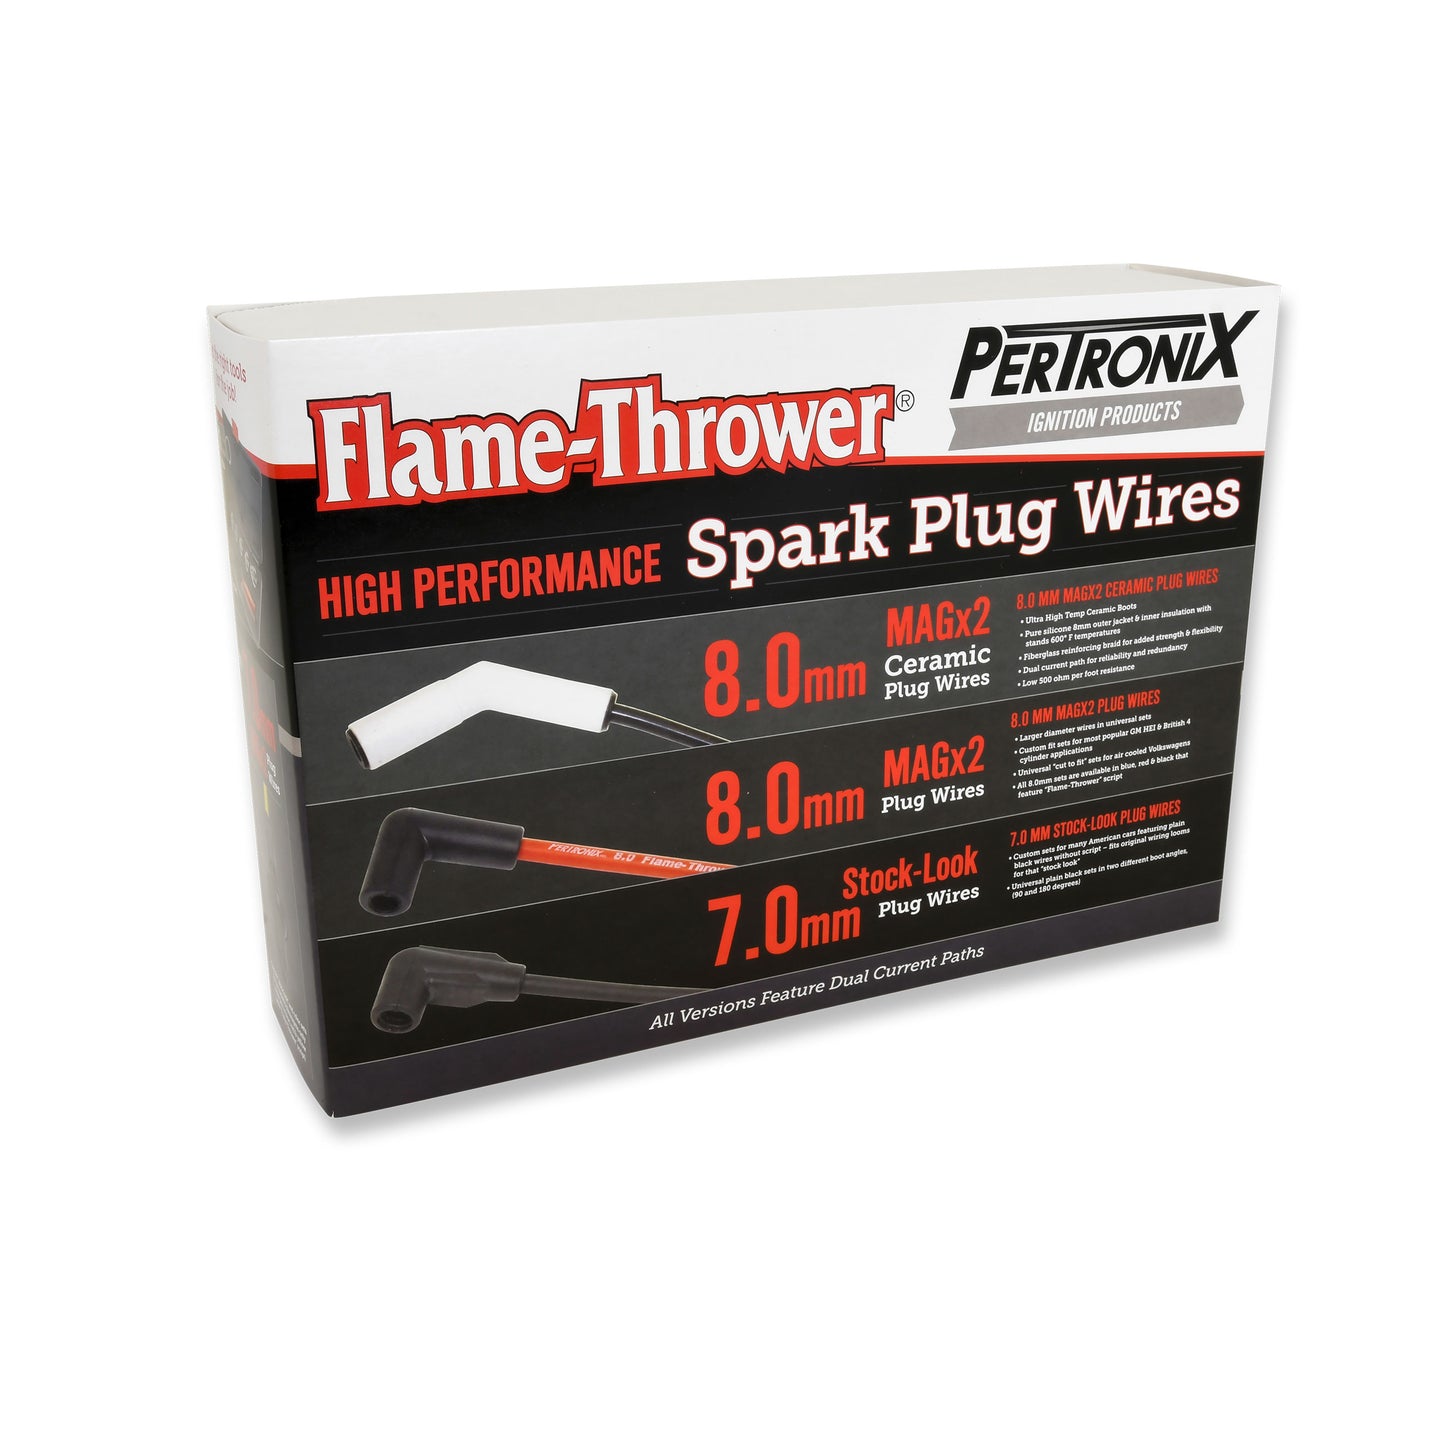 PerTronix 806426 Flame-Thrower Spark Plug Wires 6 cyl 8mm 1996-2005 GM S10/Blazer/Astro Truck 4.3L Red